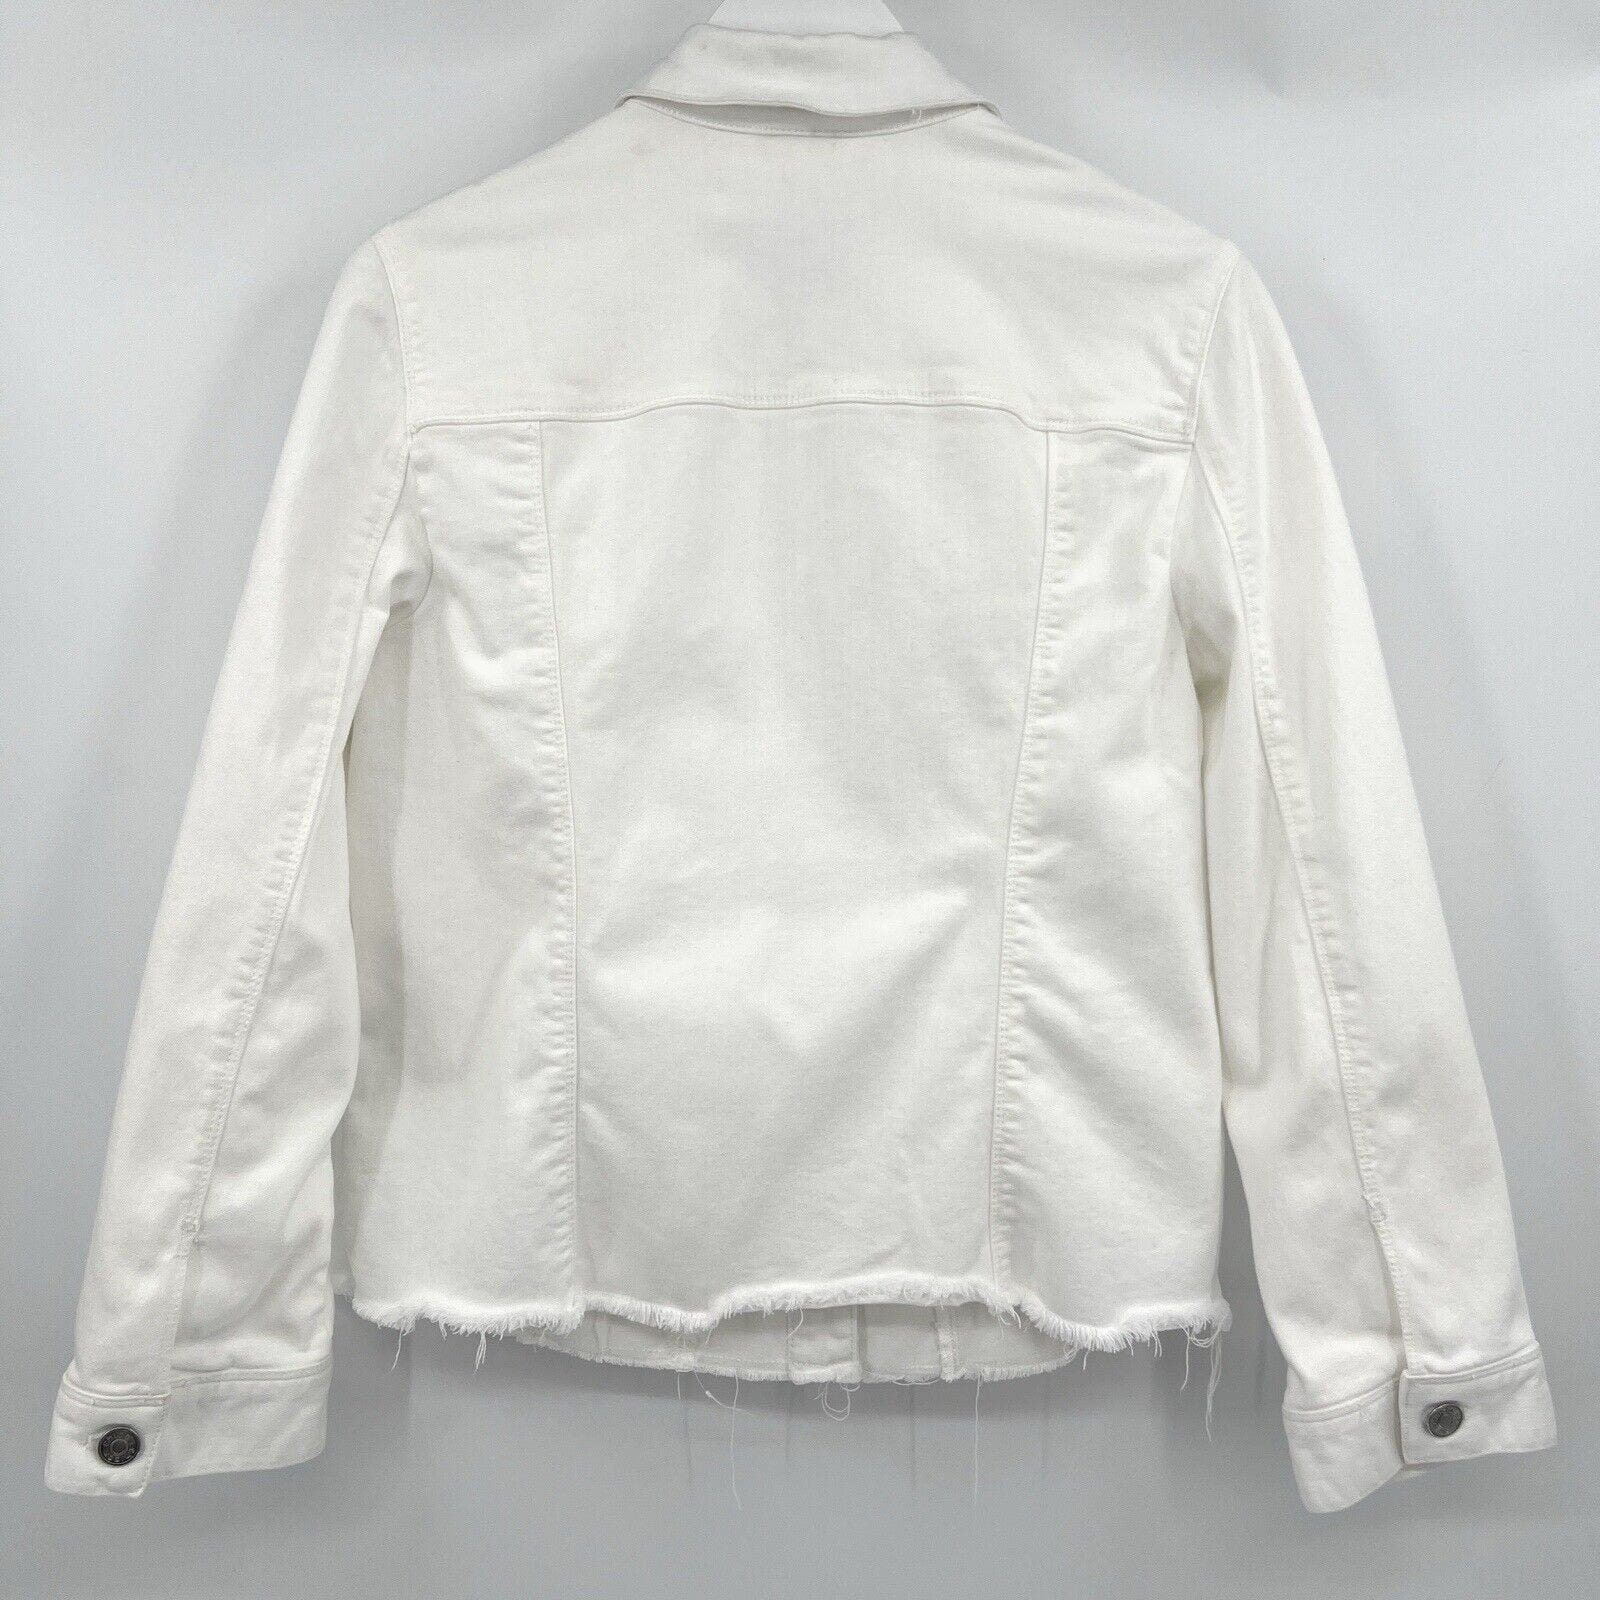 Wholesale price Chicos White Denim Jean Collared Button Up Jacket Raw Hem Size 2 Women’s Large P521cx4ic Buying Cheap